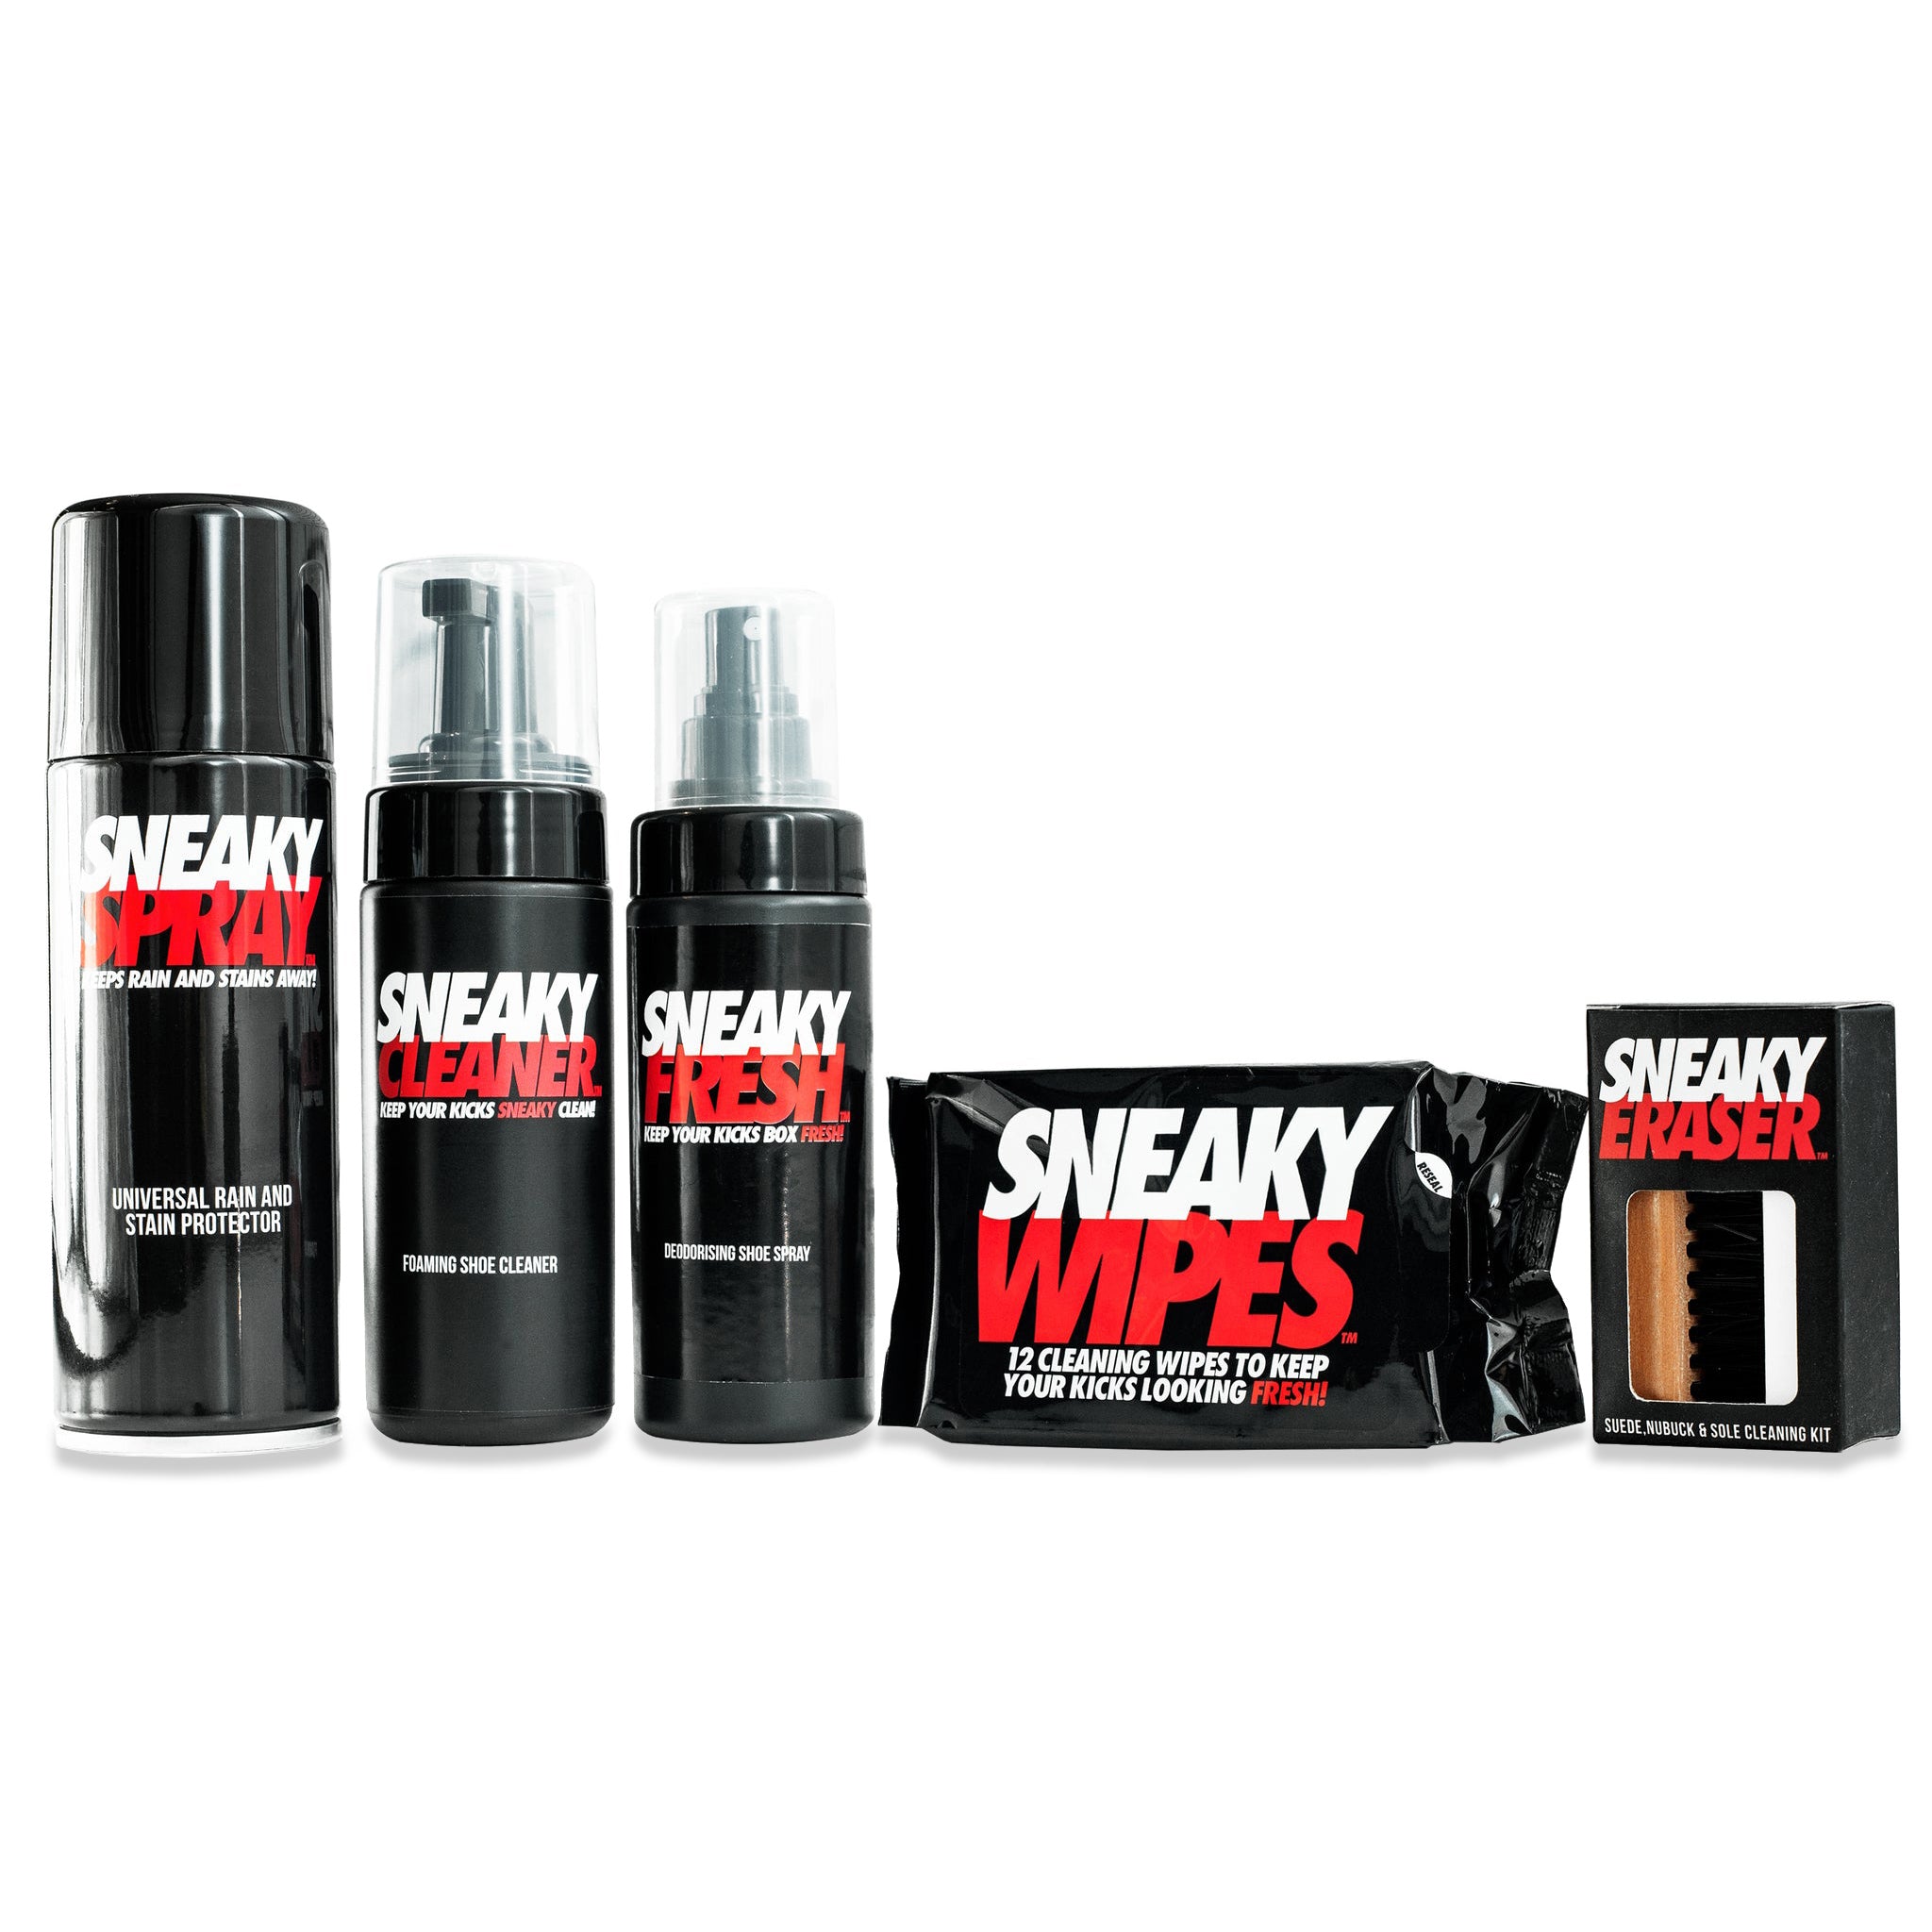 Image of Sneaky Complete Shoe Cleaning Kit